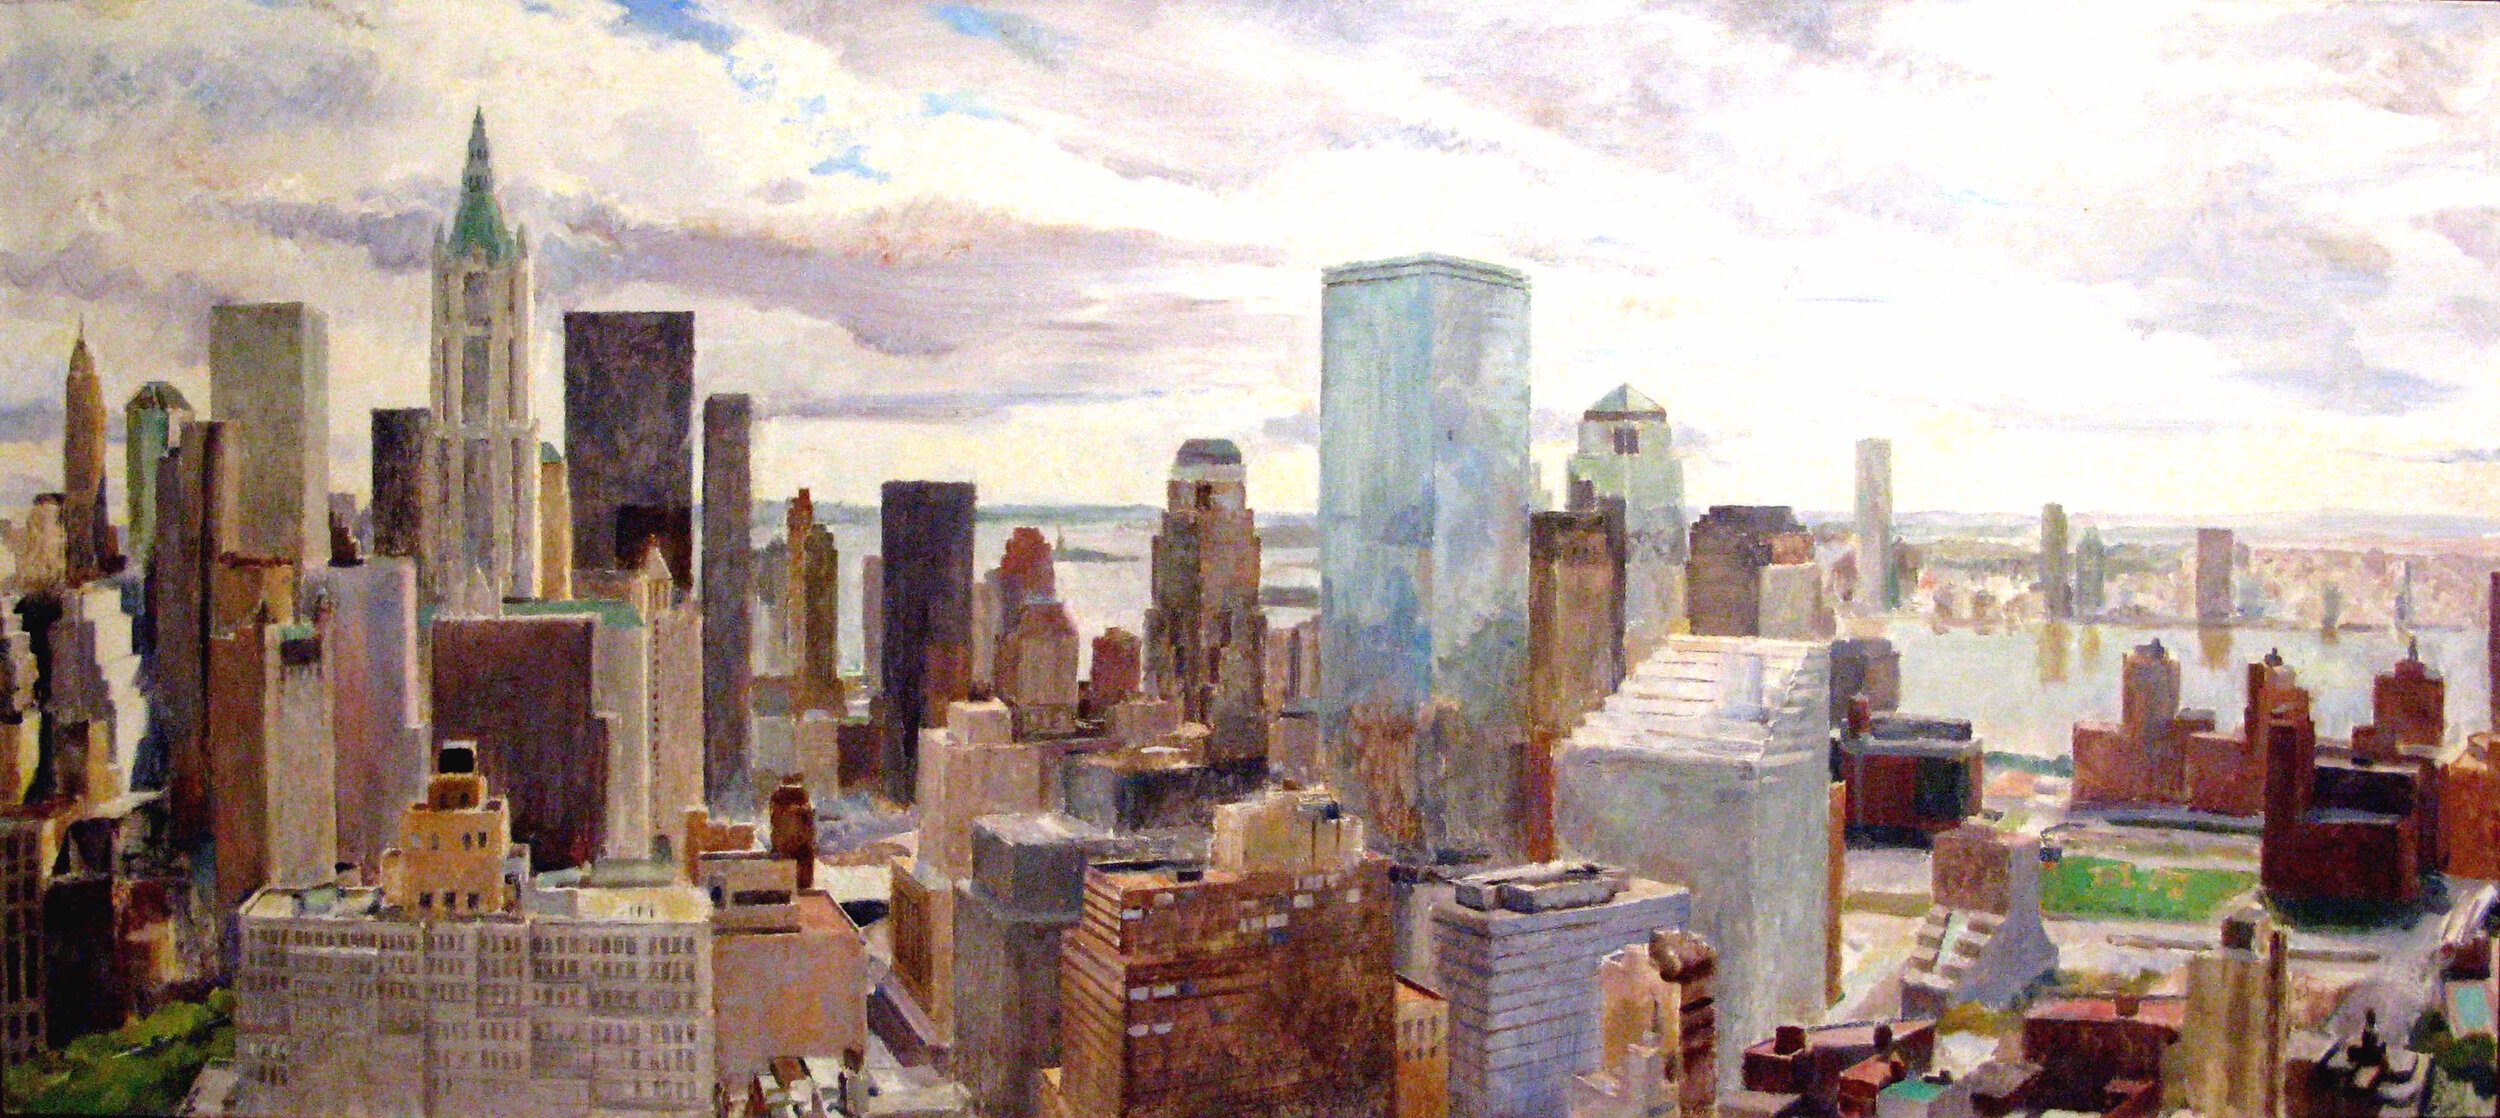 South of Duane Street, oil on linen, 30 x 72 inches, 2005.